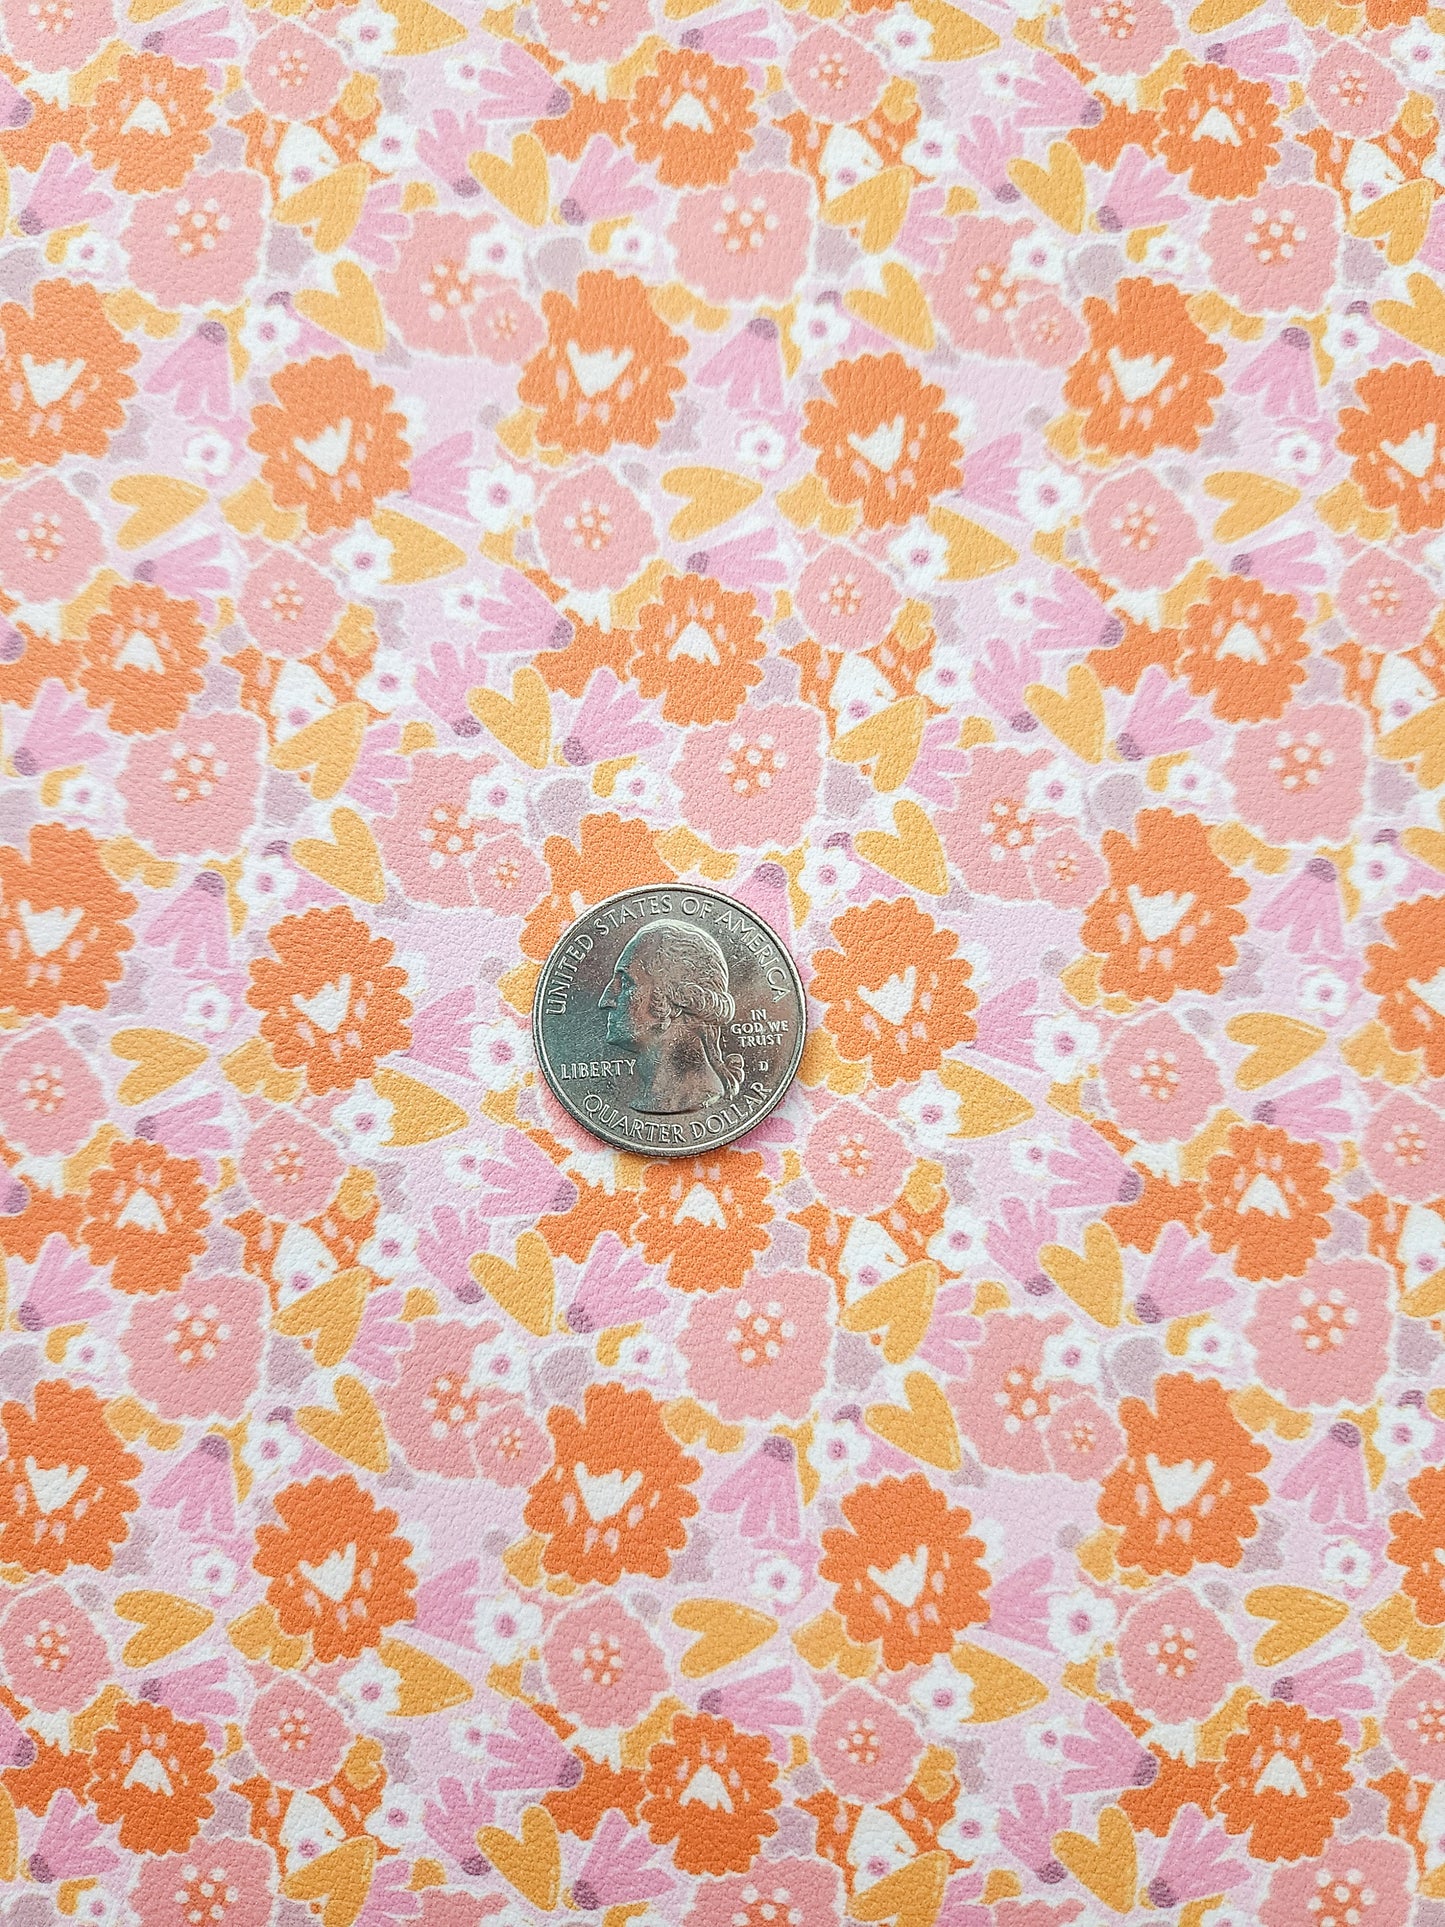 Lovely Pink Orange Yellow Floral 9x12 faux leather sheet